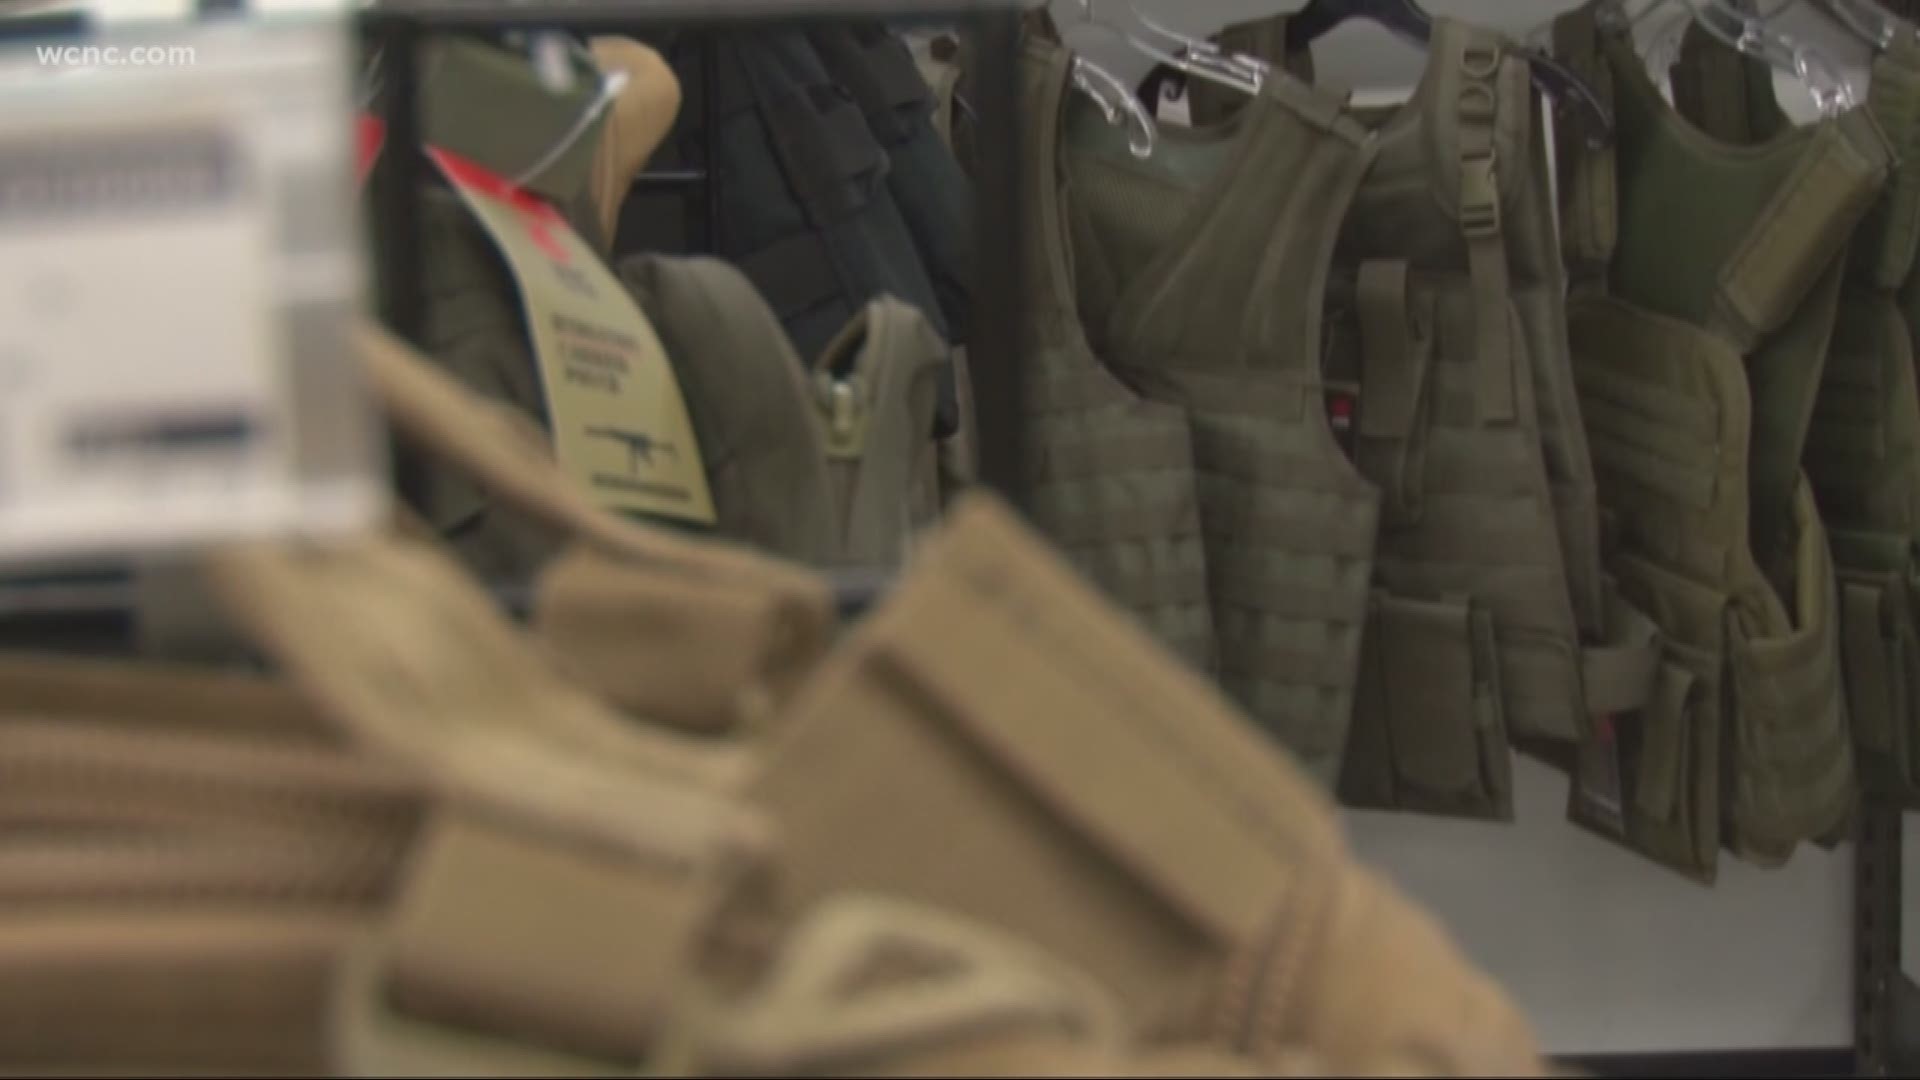 A company that makes bullet resistant material says a growing number of first responders want body armor, but they are having trouble with the cost.